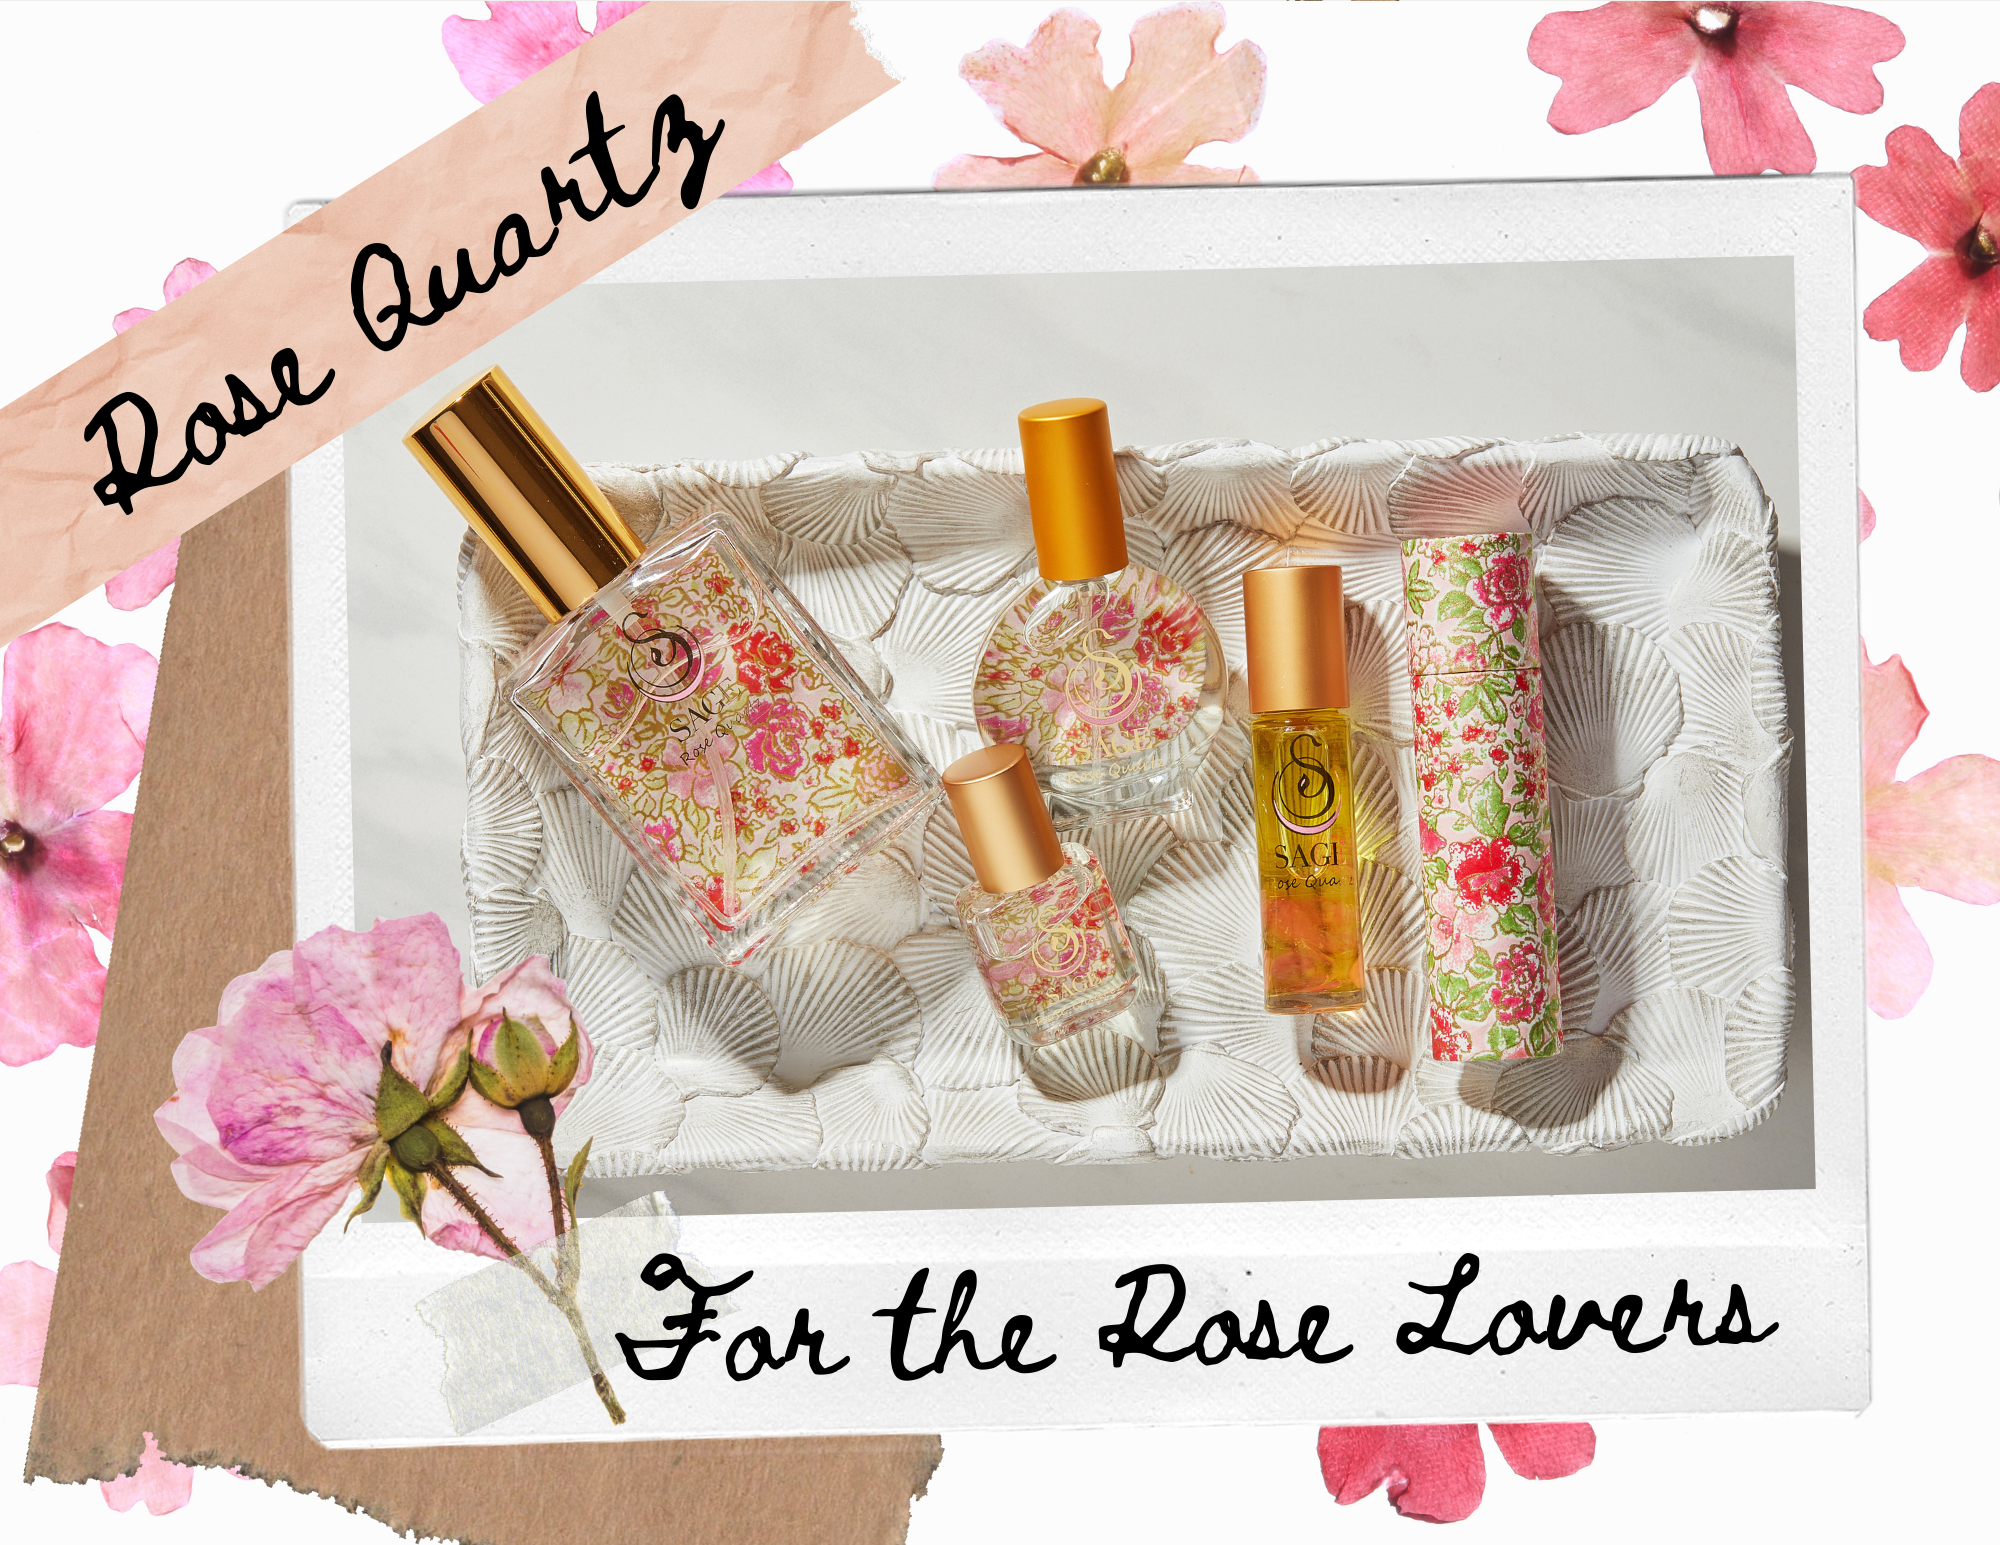 Image of rose quartz glass bottles collection on a tray decorated by seashells with the words for for the rose lovers on the bottom.